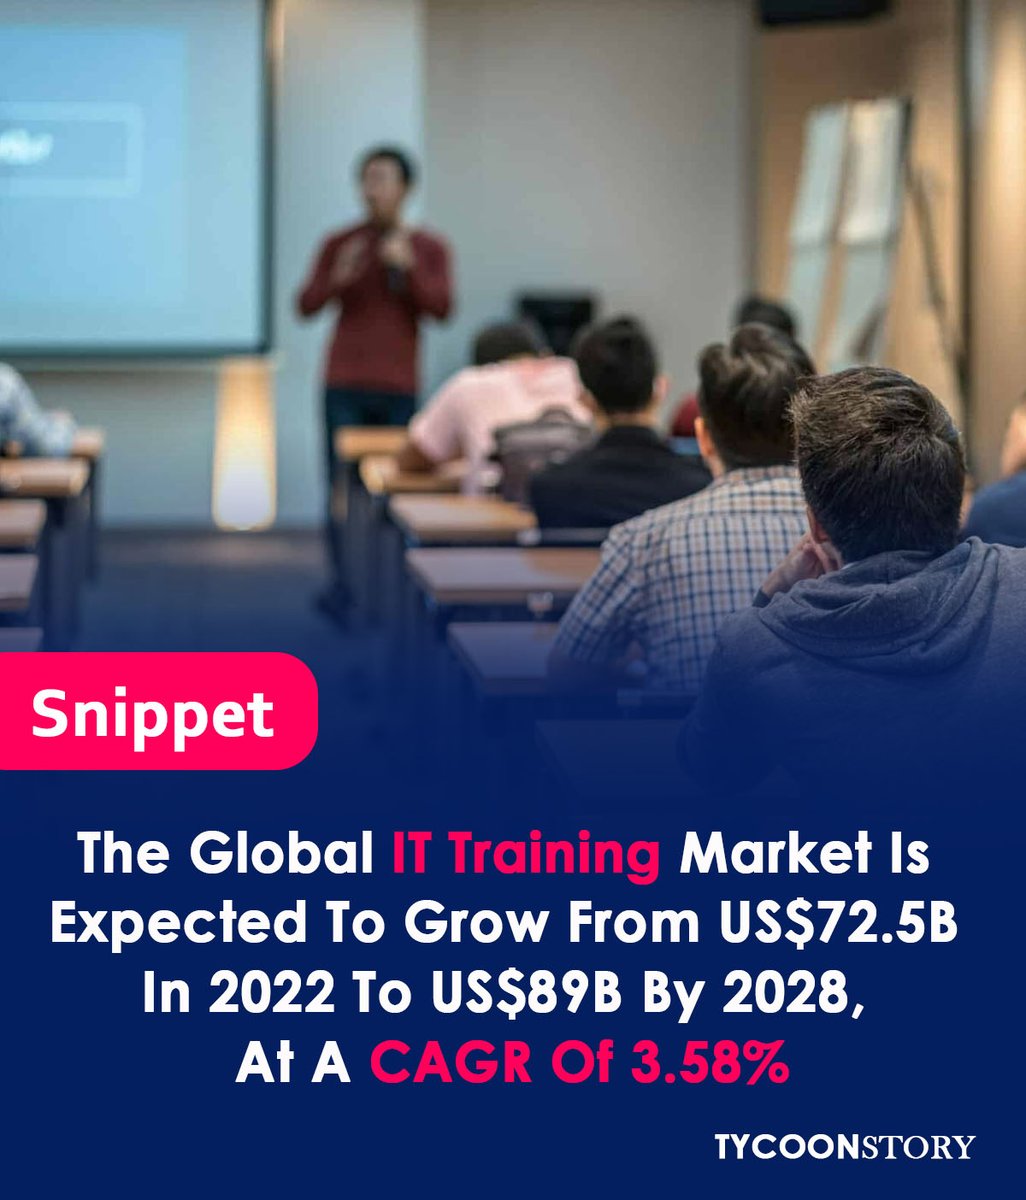 The global IT training market is projected to grow from $72.5 billion in 2022 to $89 billion by 2028, at a CAGR of 3.58%
#TechEducation #OnlineLearning #ITSkills #cybersecurity #datascience #cloudcomputing #uxdesign #DataScienceTraining #DigitalSkills  #marketresearch #business